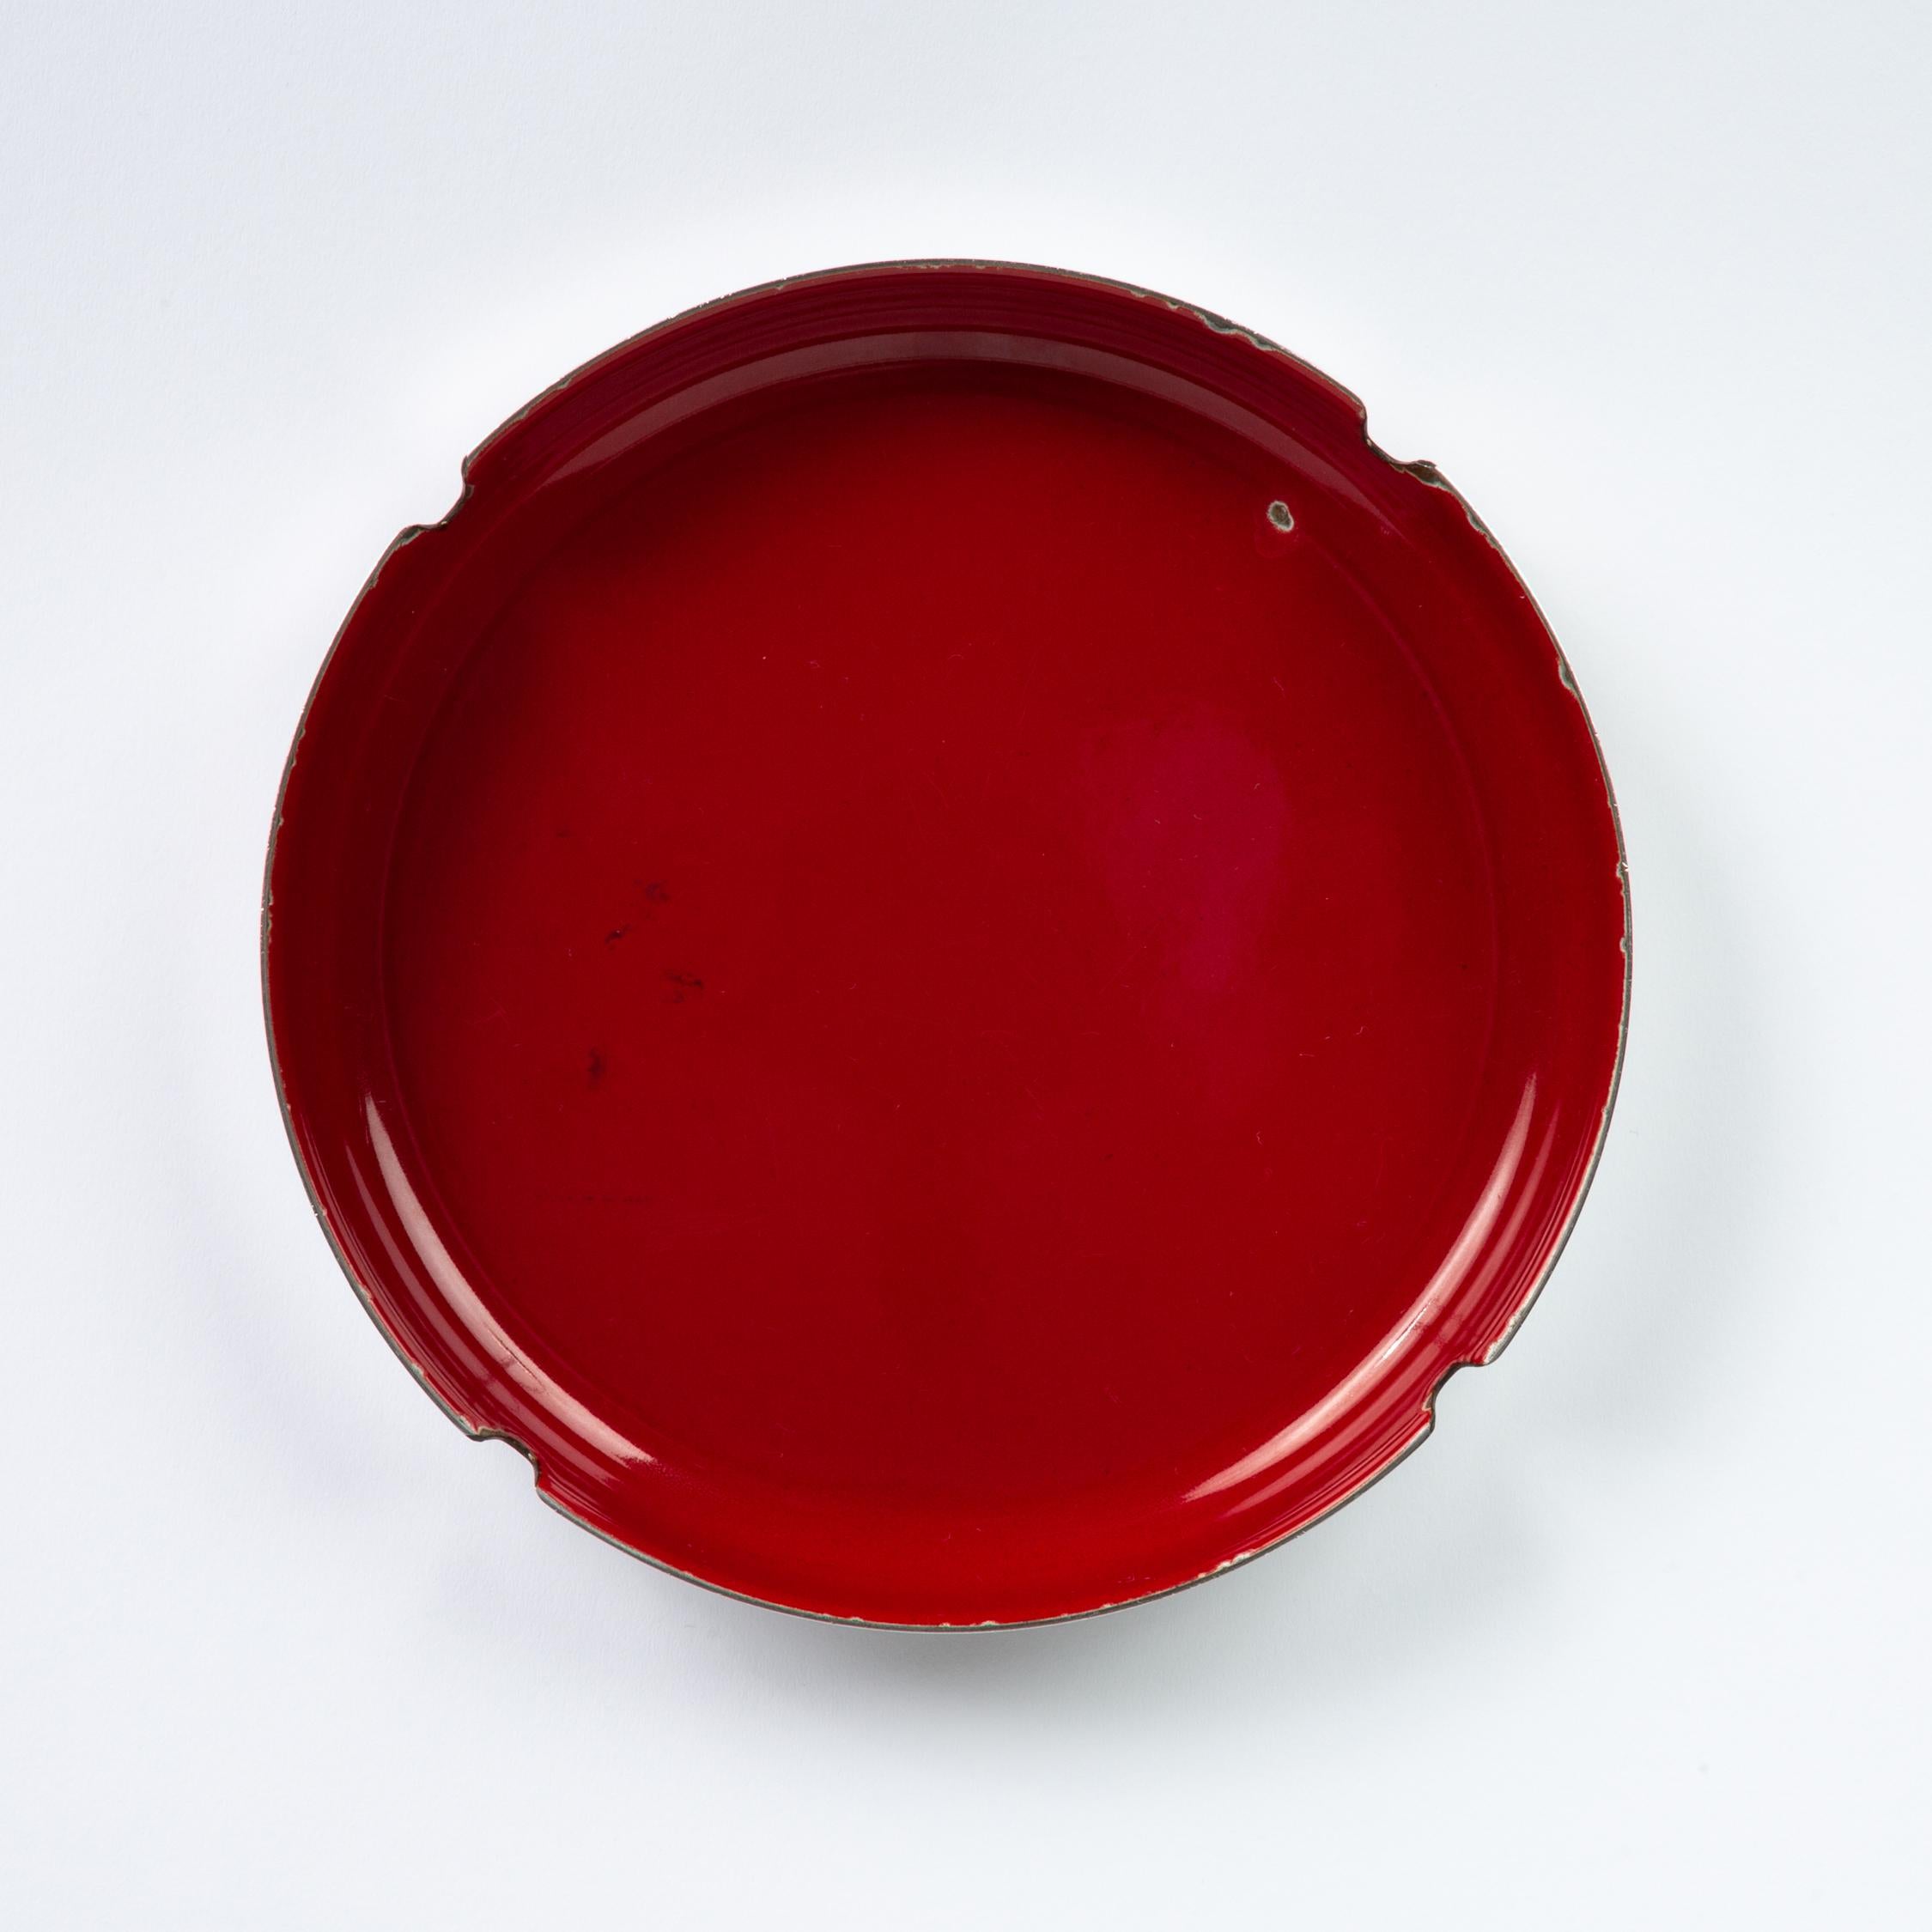 20th Century Enamelware and Stainless Steel Ashtray by Leif Wessmann